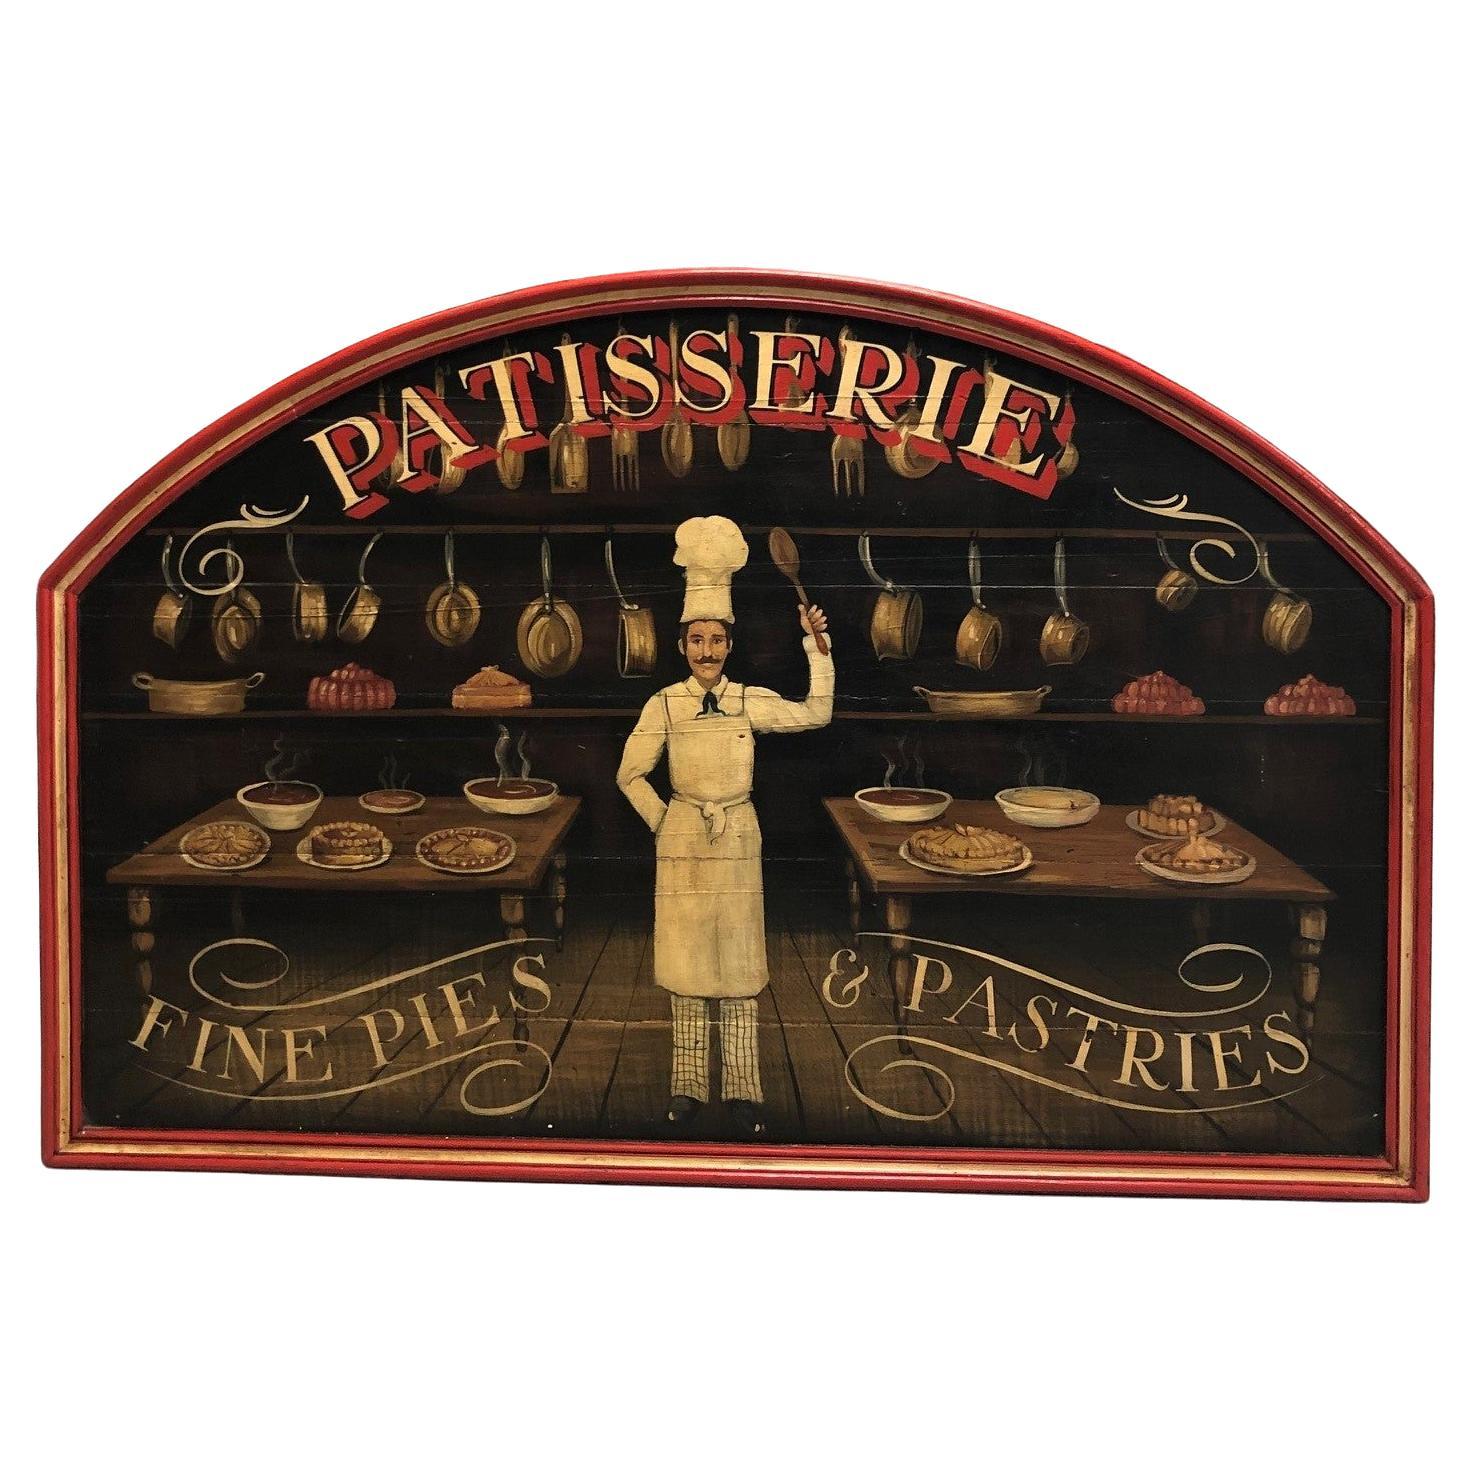 Late 20th Century Pastry Shop Sign Patisserie Fine Pies and Pastries For Sale